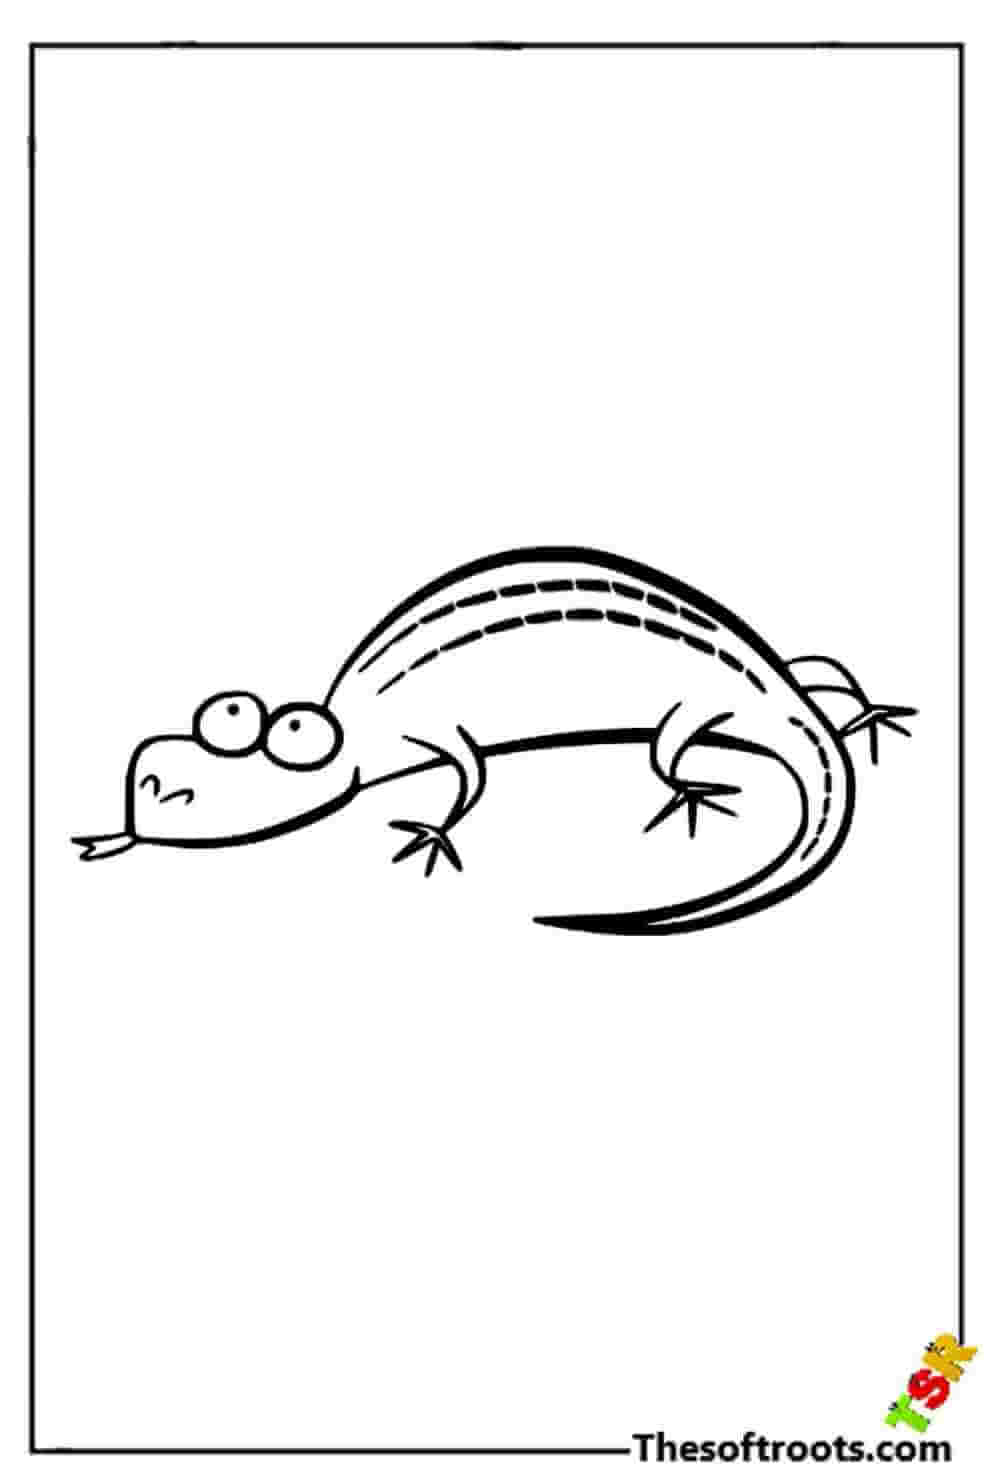 Funny lizard coloring pages